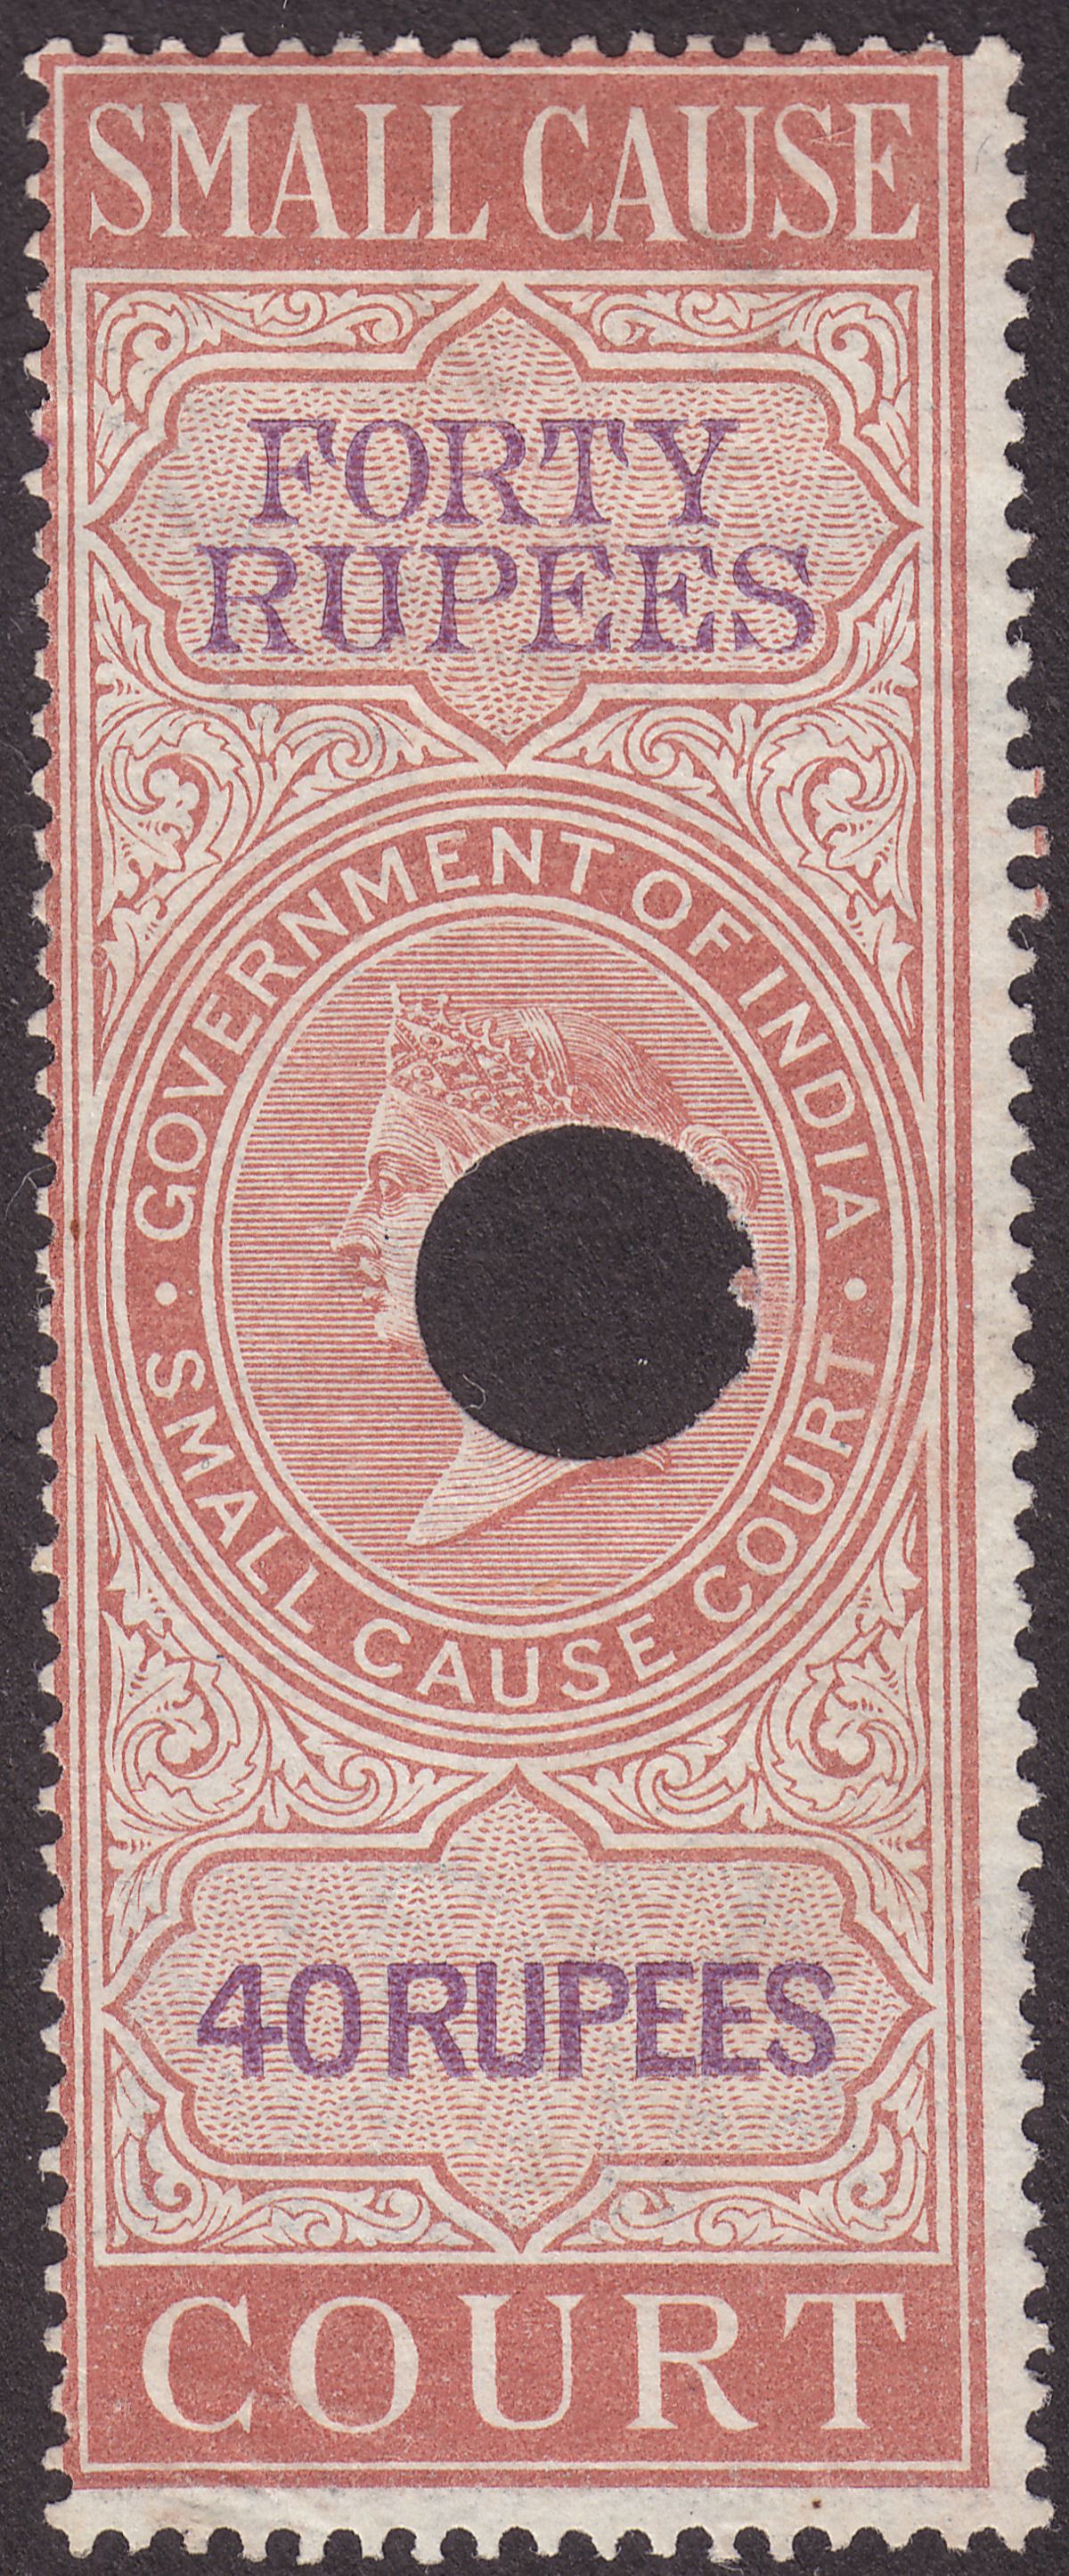 India 1868 QV Revenue Small Cause Court 40r Orange and Violet Used BF25